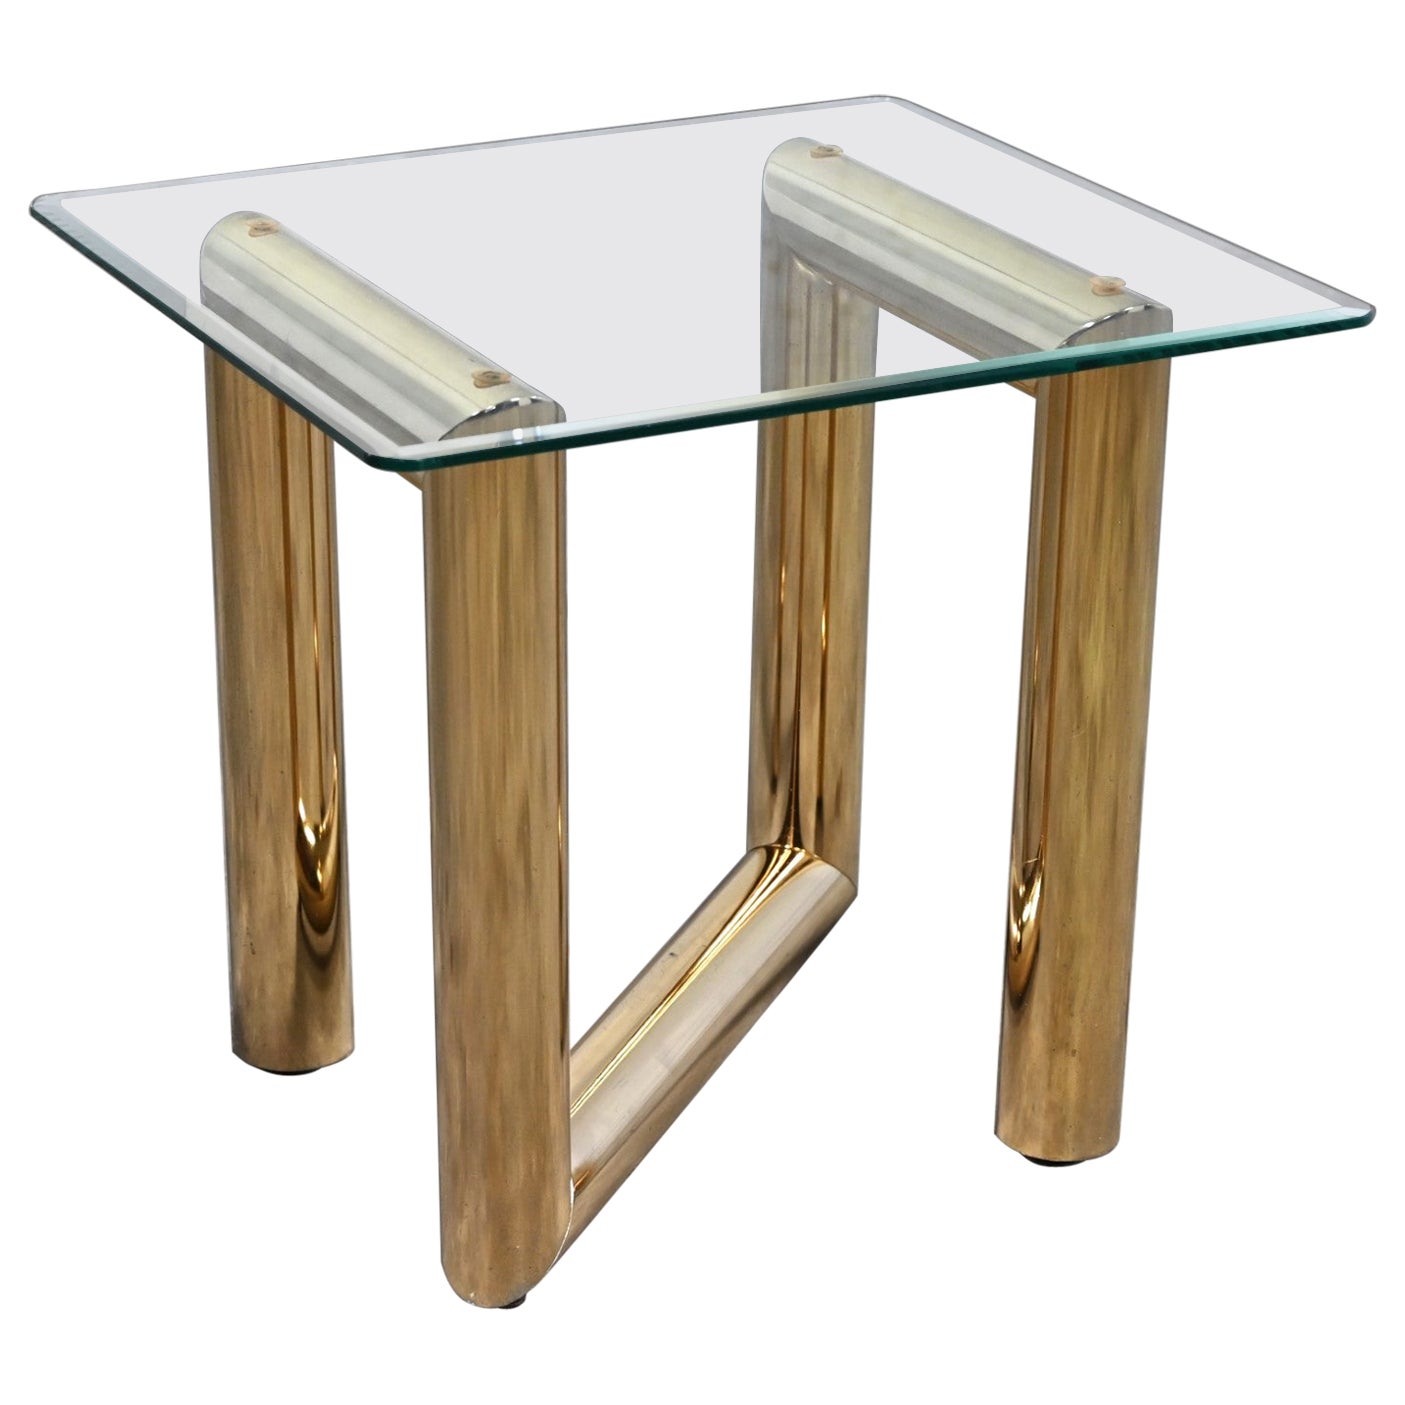 1970s Modern Brass Plated End or Side Table Square Glass Top Style Karl Springer For Sale